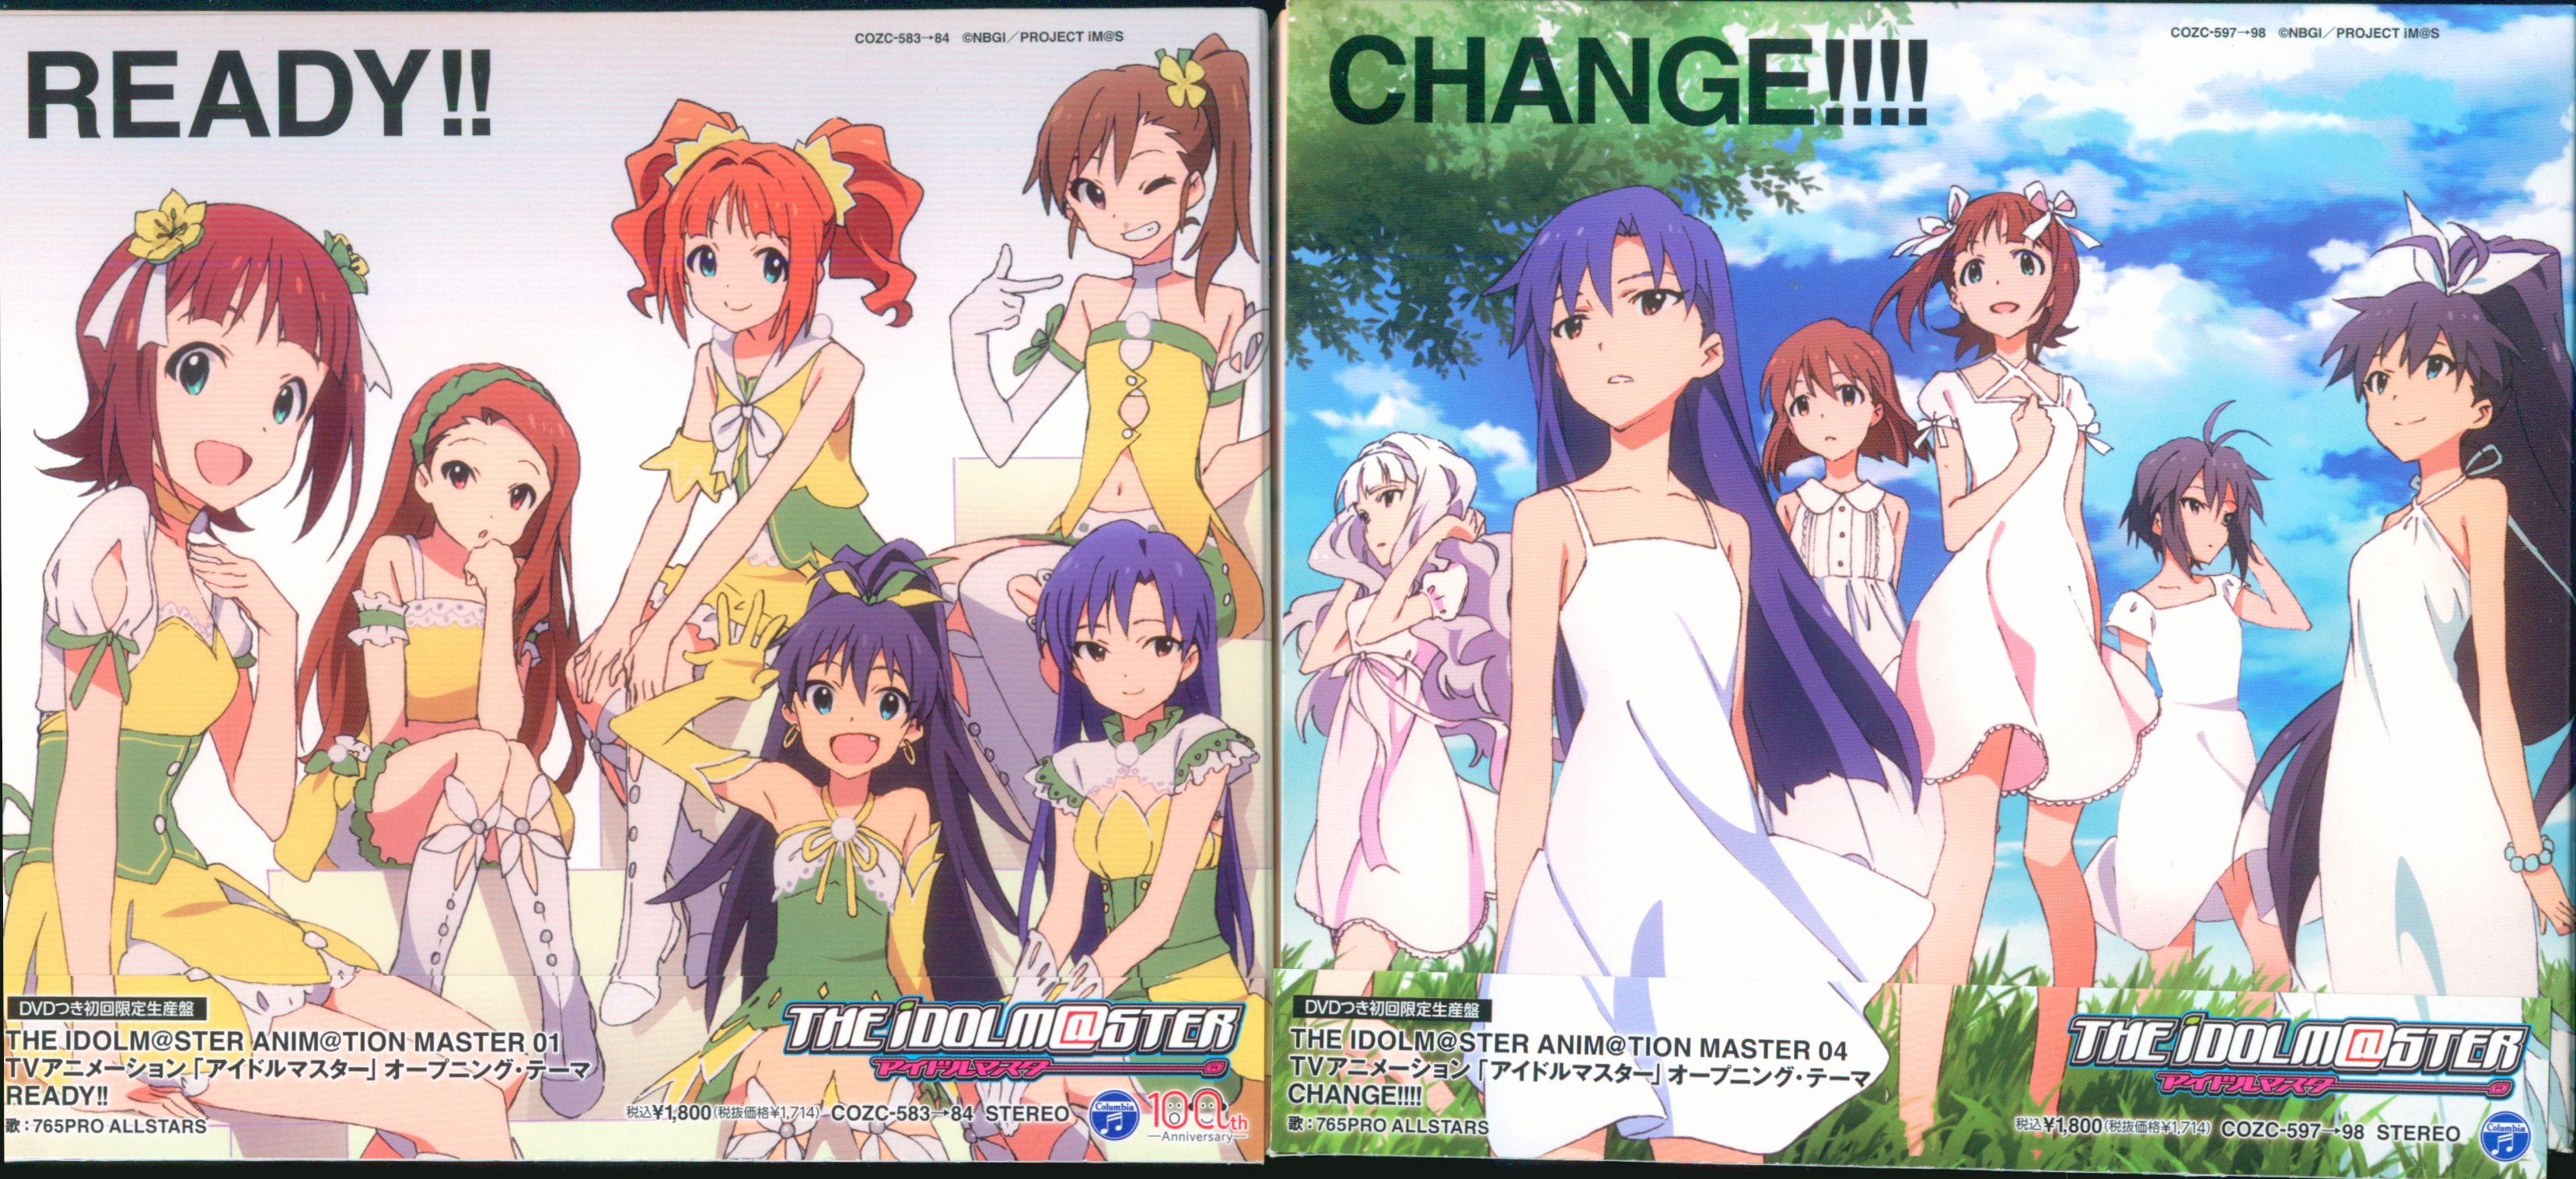 Anime CD The Idolmaster (idolm@ster) READY !! ＋ CHANGE !!!! with DVD First  Release Limited Edition With Animate Box set | MANDARAKE 在线商店